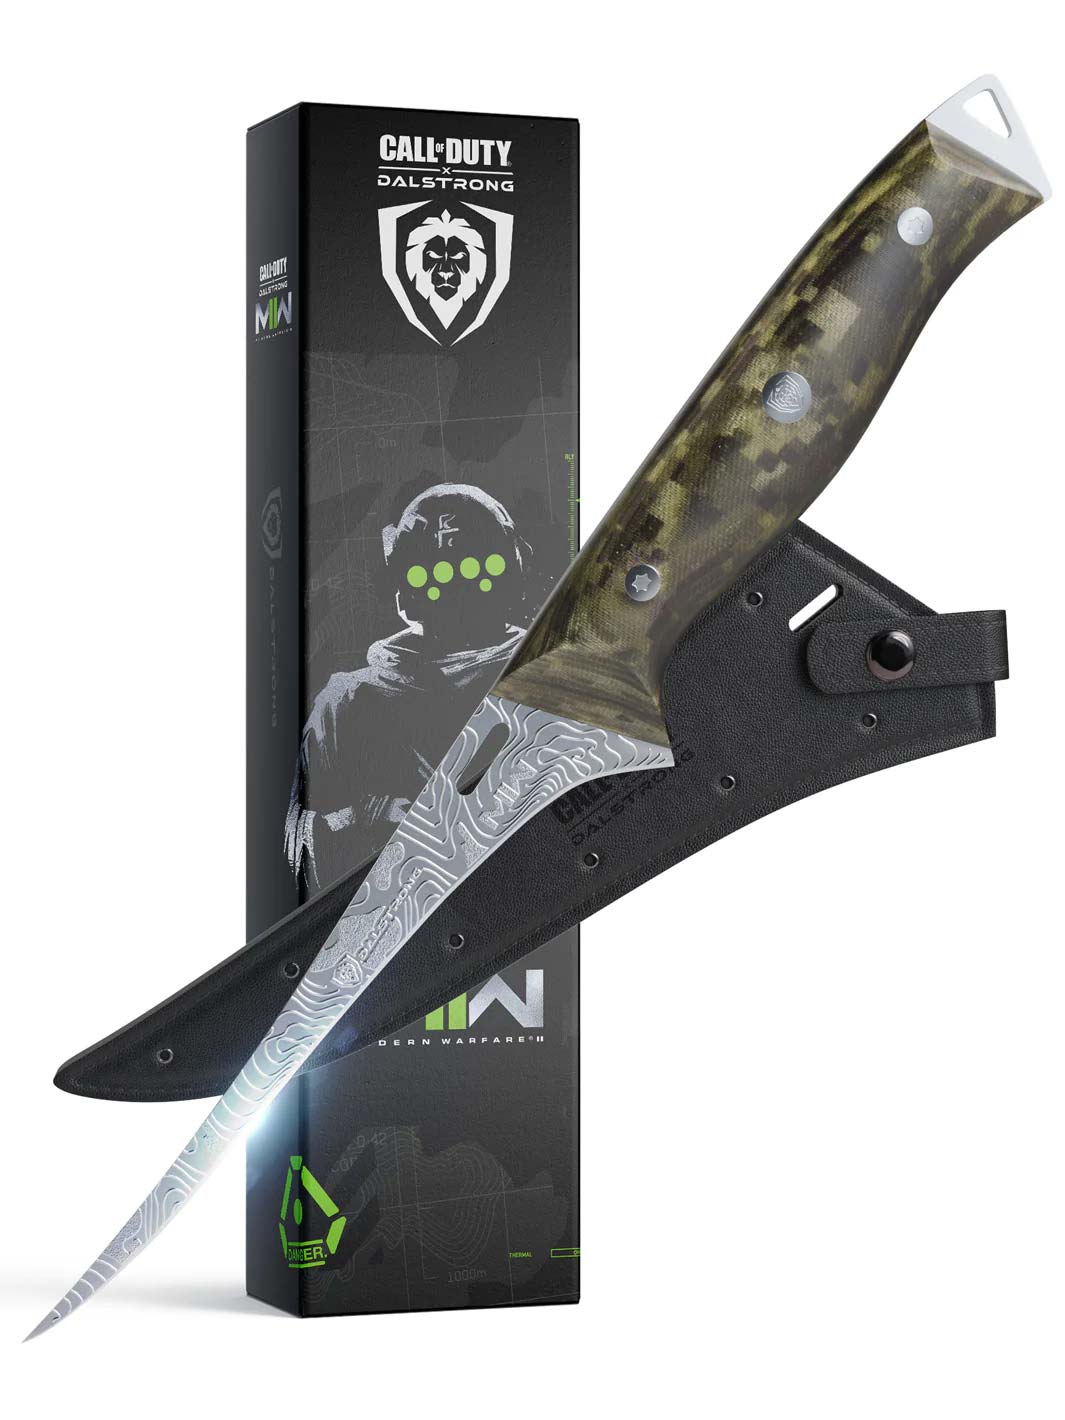 Dalstrong call of duty series 6 inch fillet knife in front of it's premium packaging.